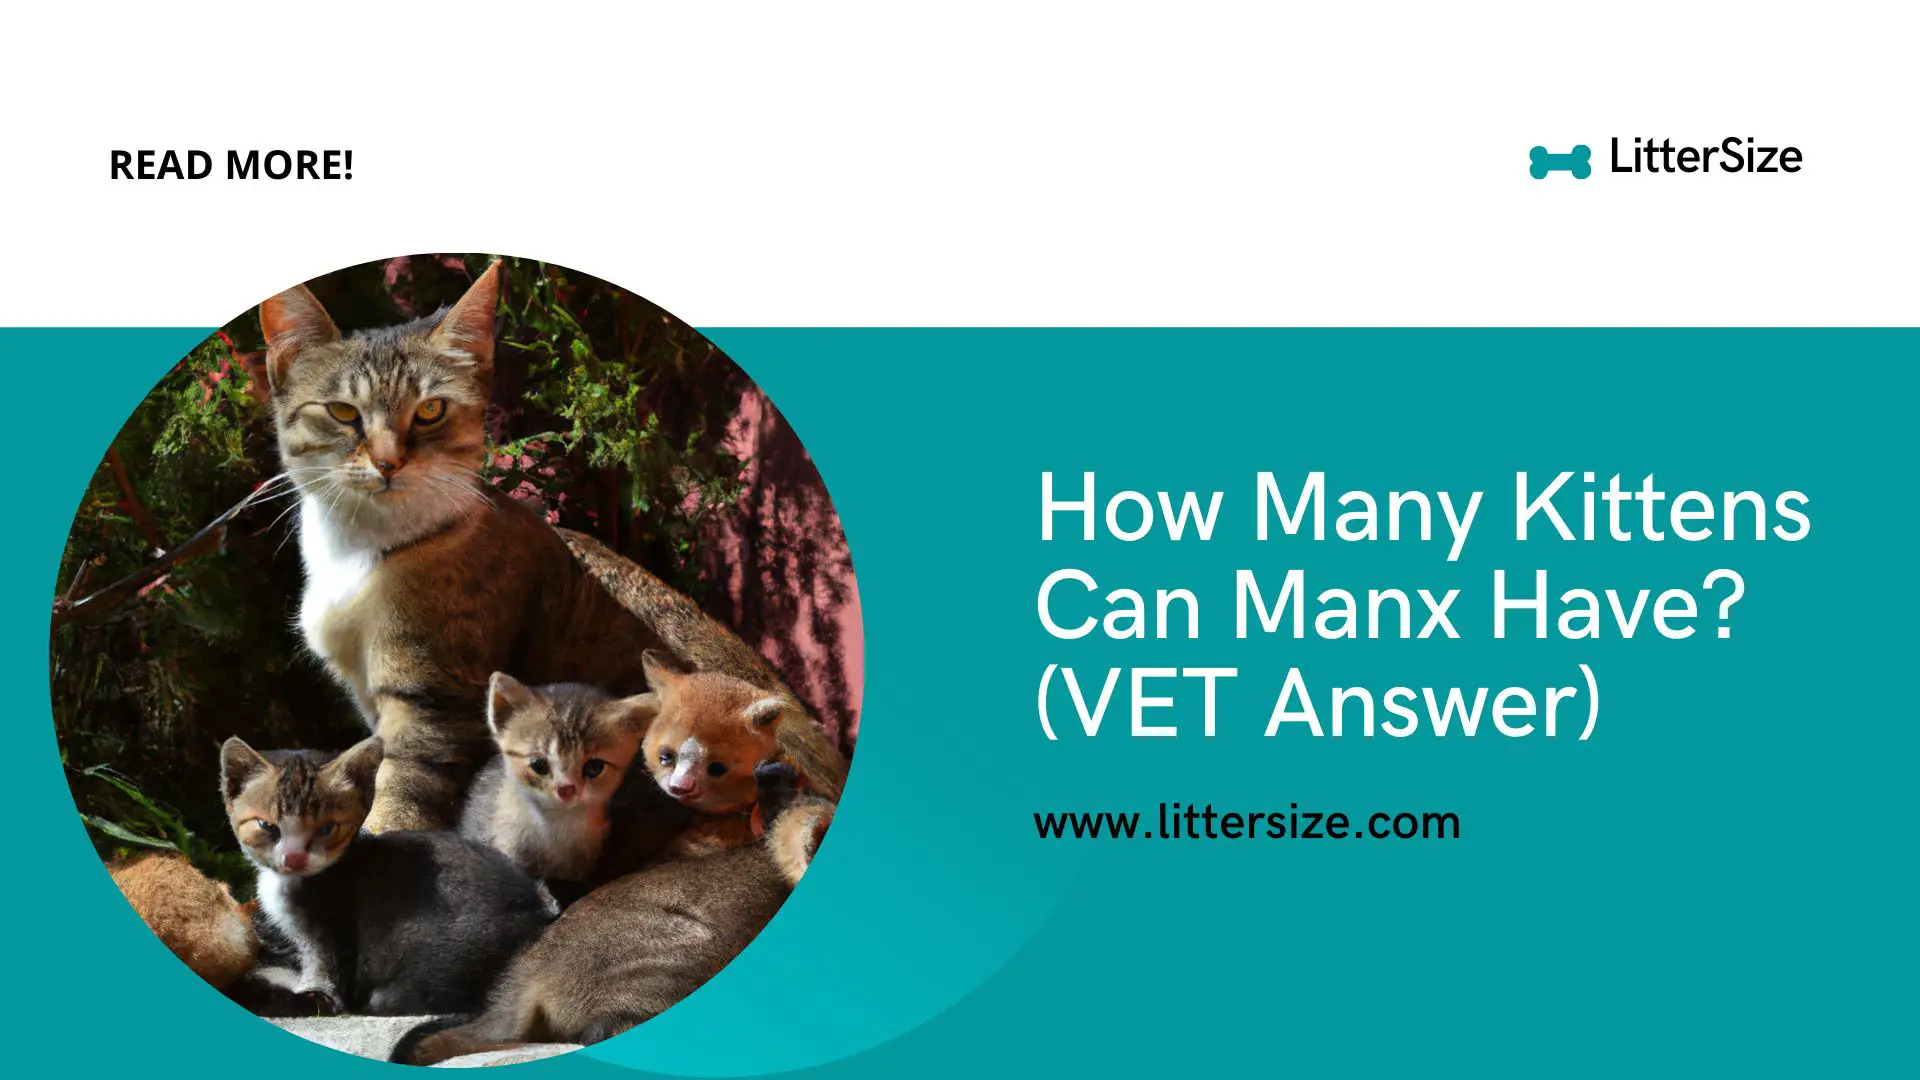 How Many Kittens Can Manx Have? (VET Answer)